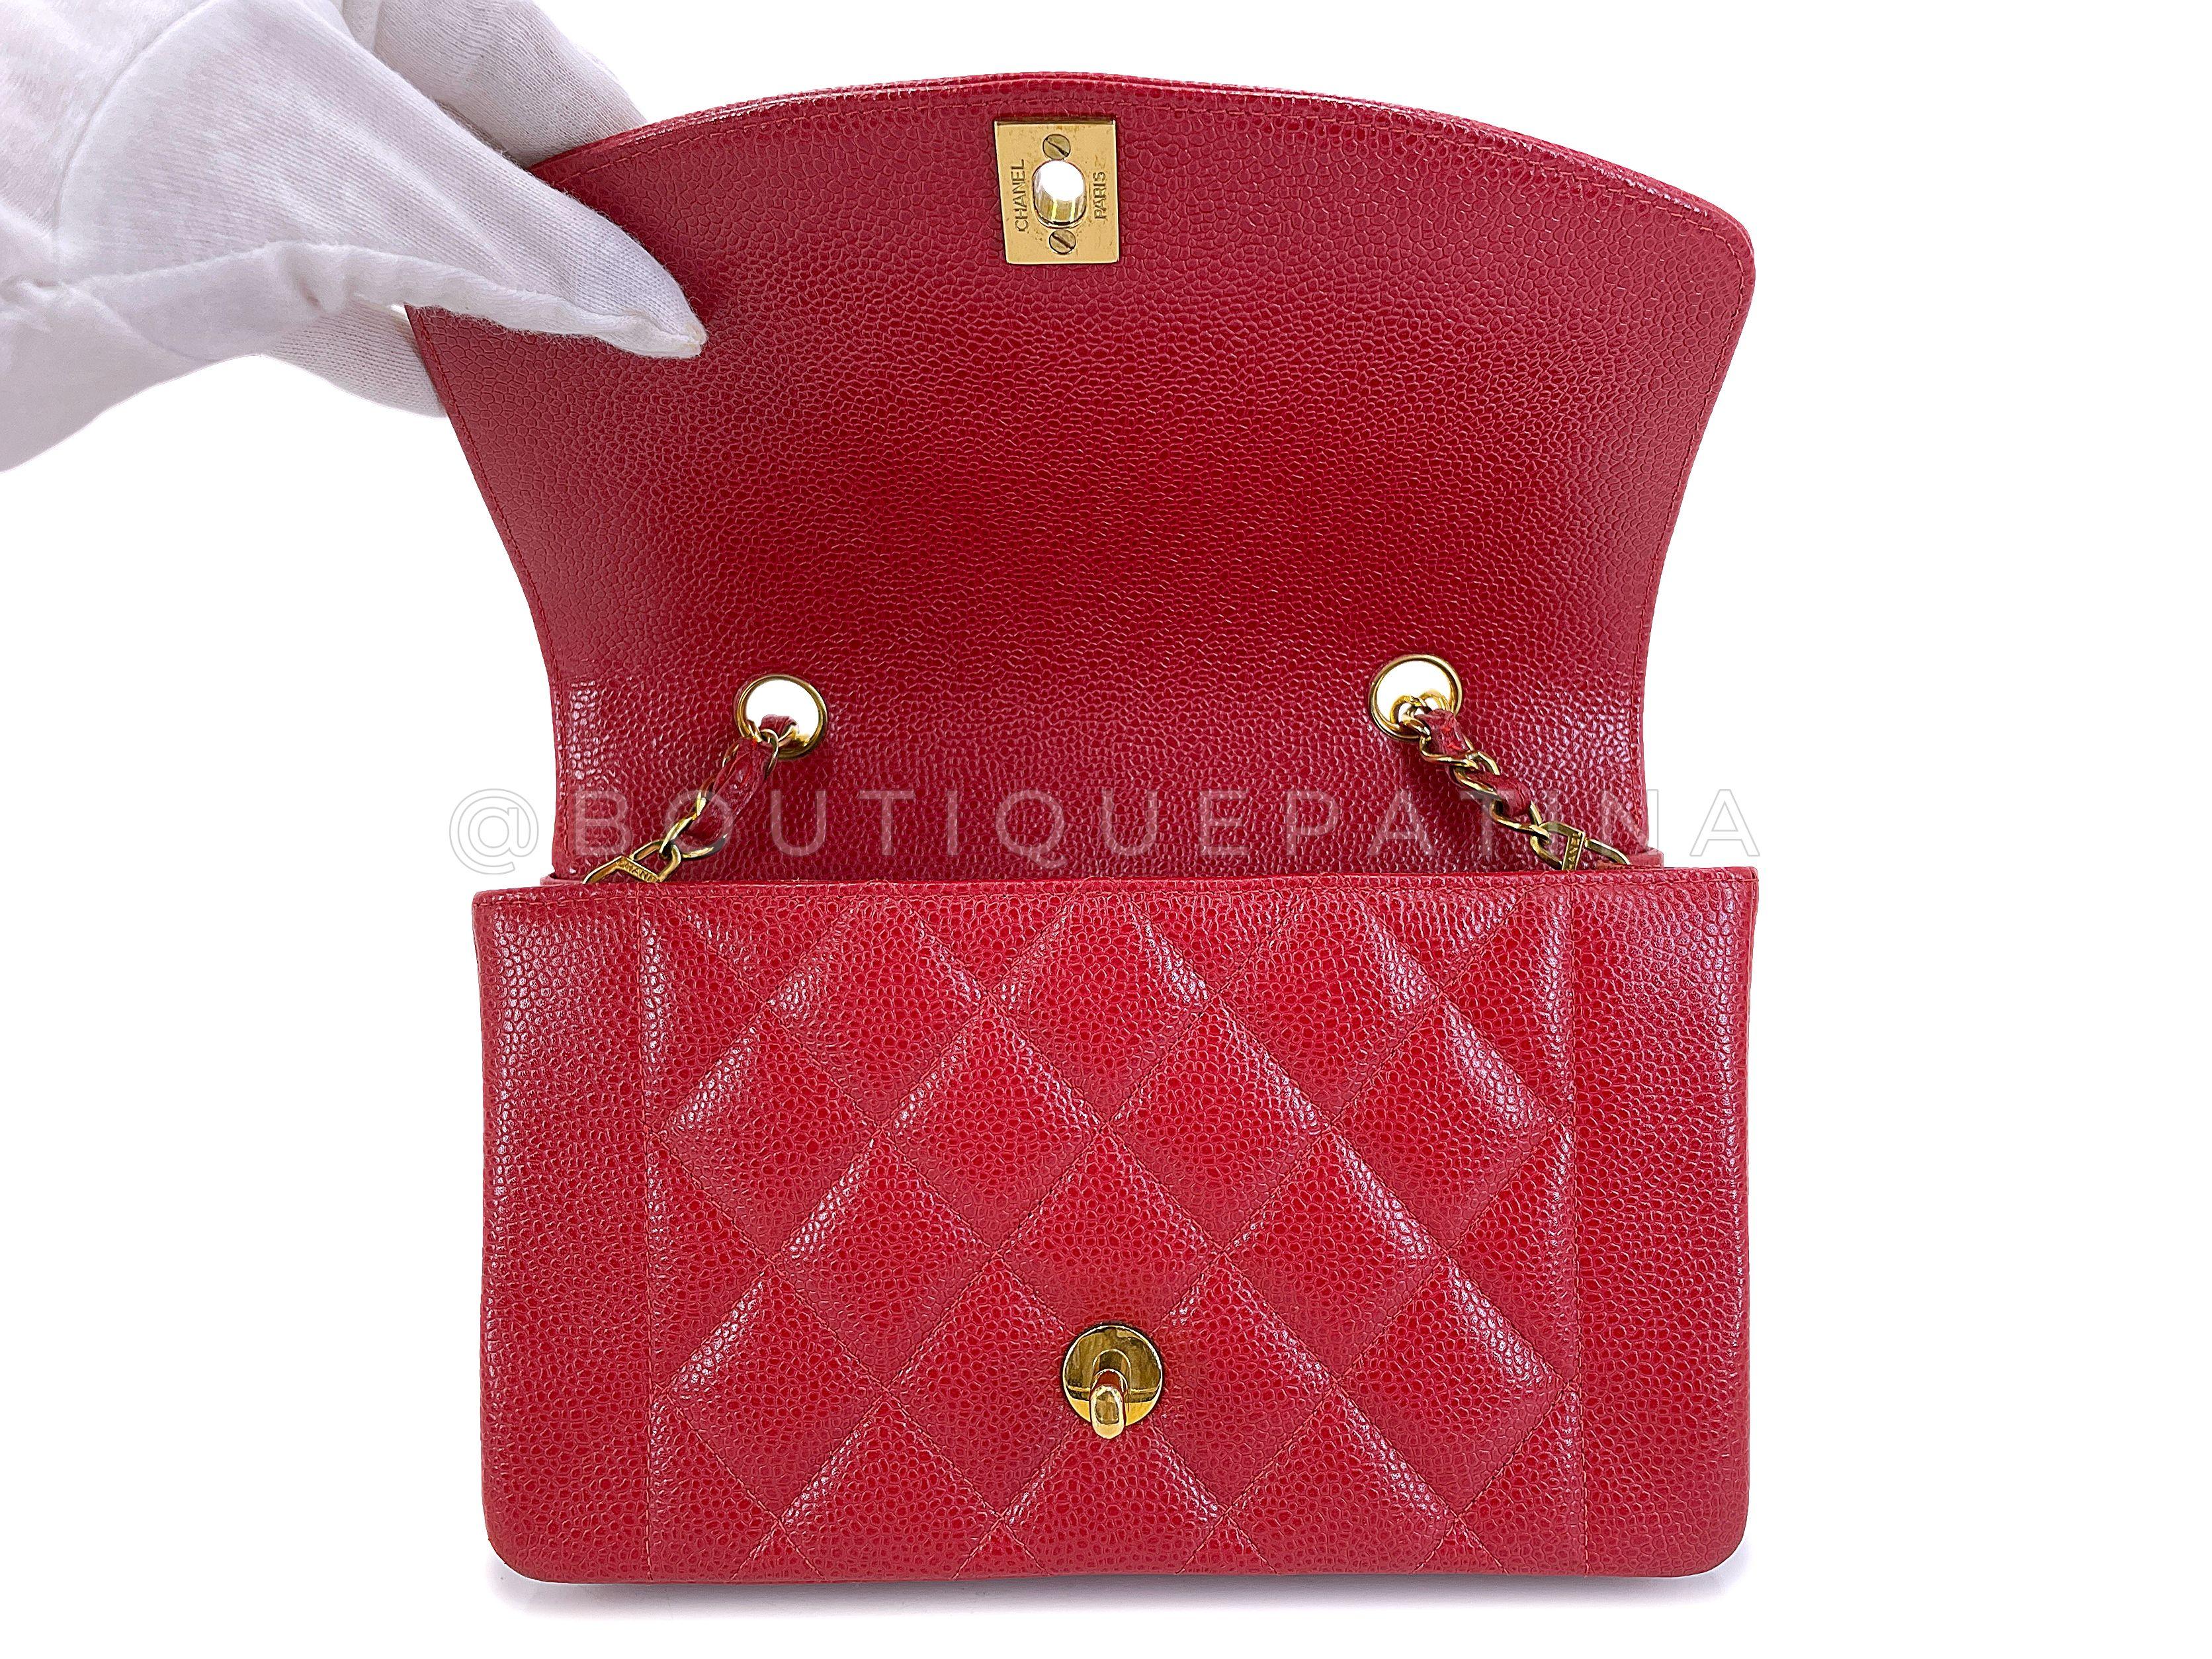 Chanel Vintage Red Caviar Small Diana Flap Bag 24k GHW 67655 For Sale 5